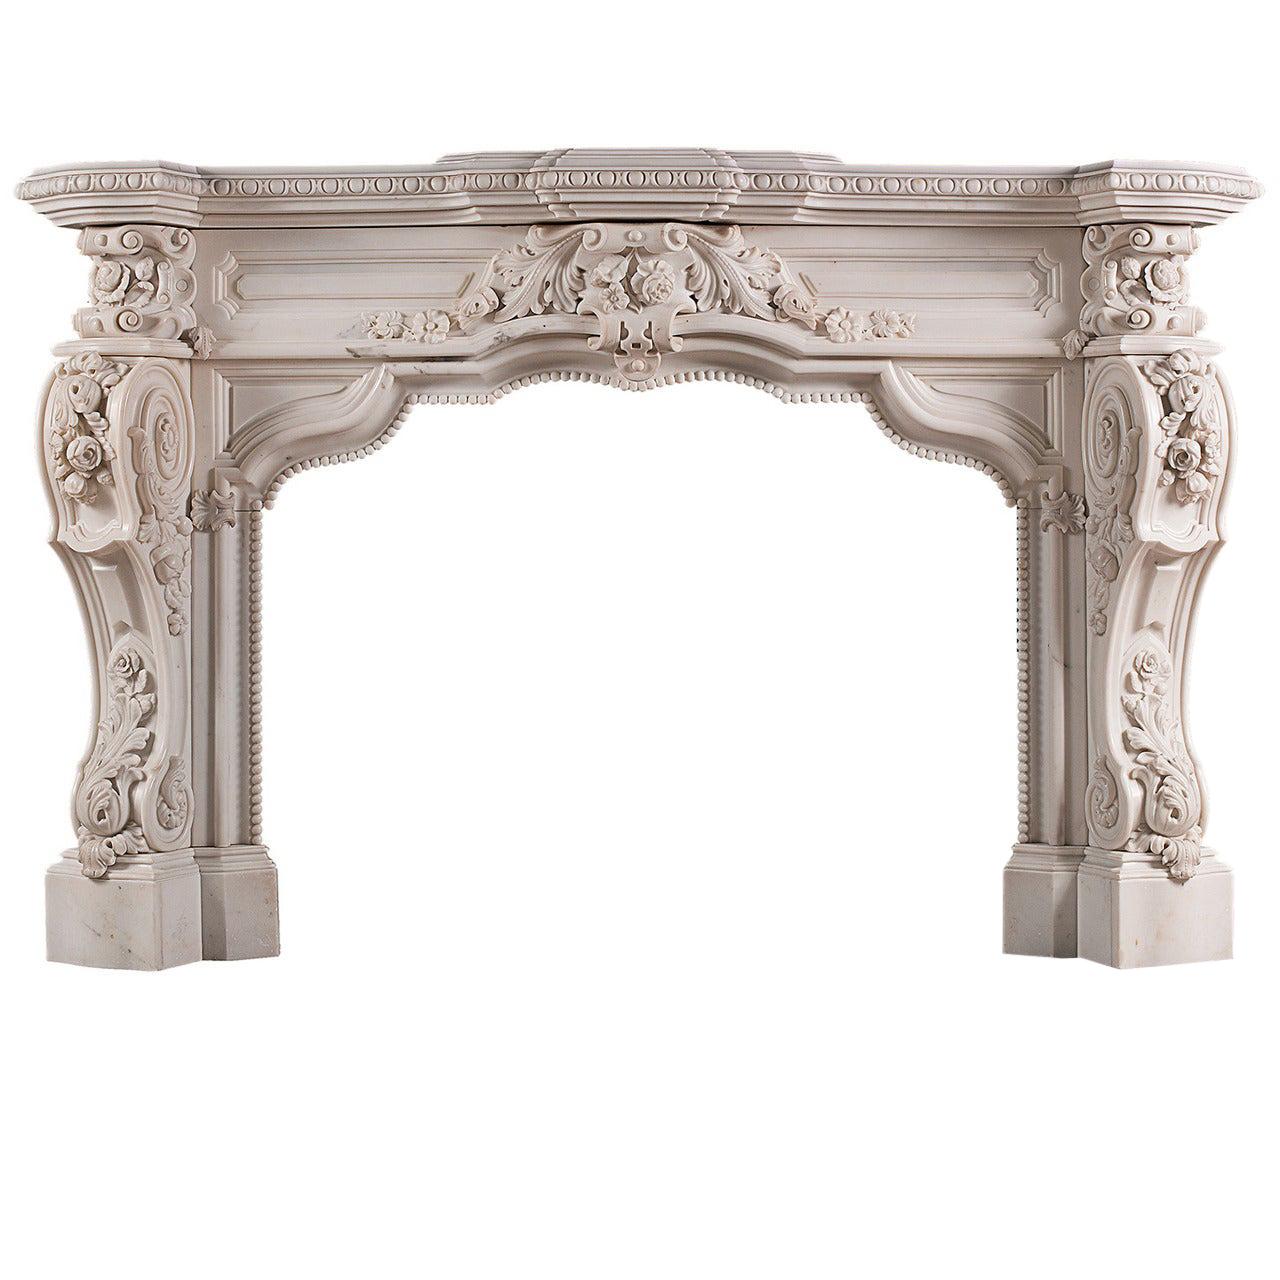 Impressive Rococo Fireplace Mantel in Statuary Marble For Sale